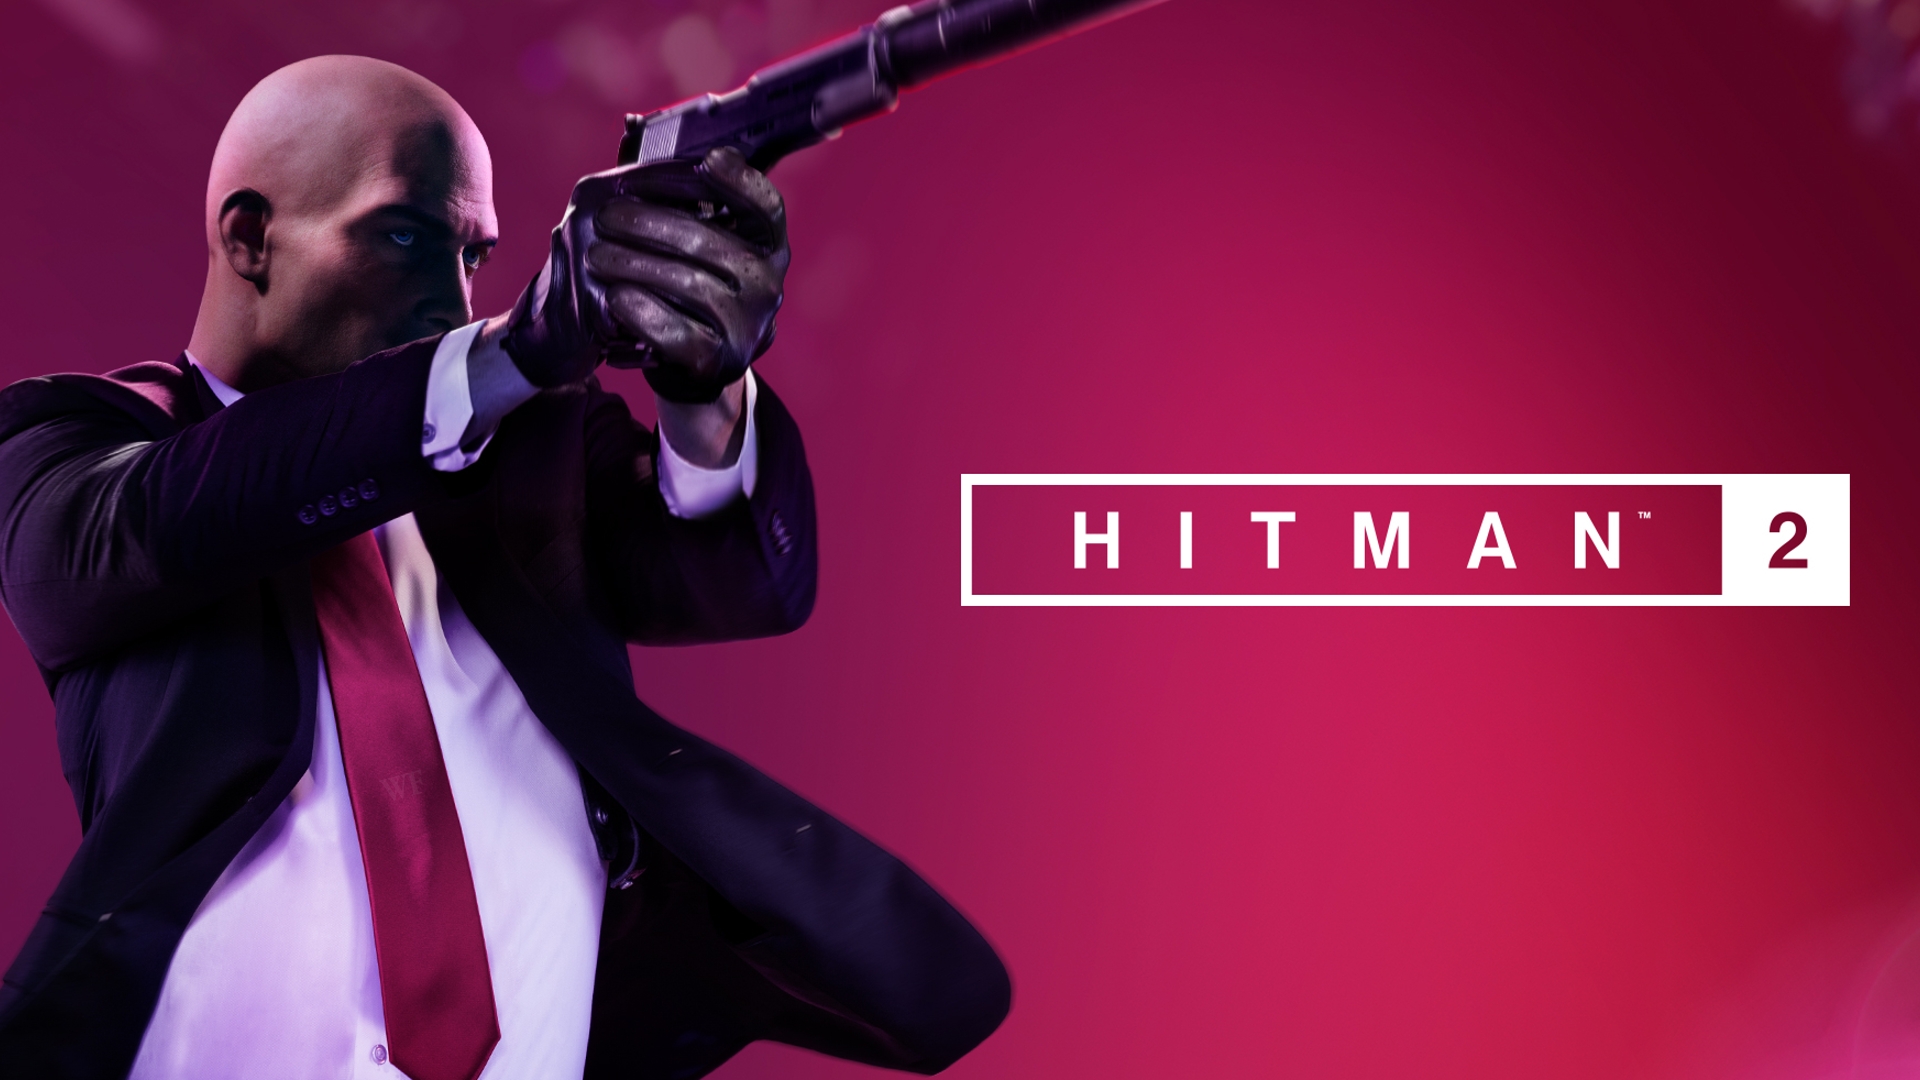 download hitman absolution ps4 for free